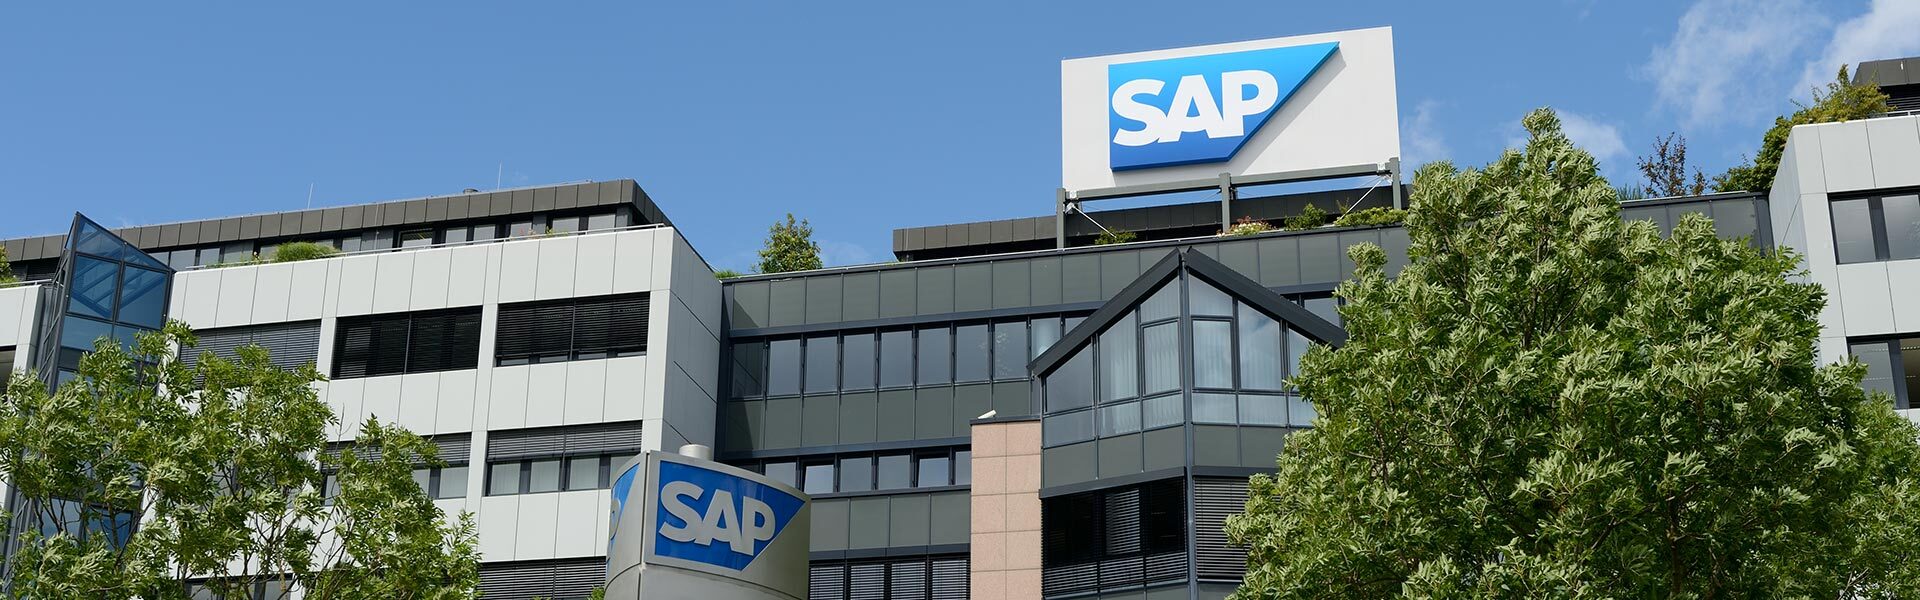 SAP’s view on the important role of digitization in achieving sustainability